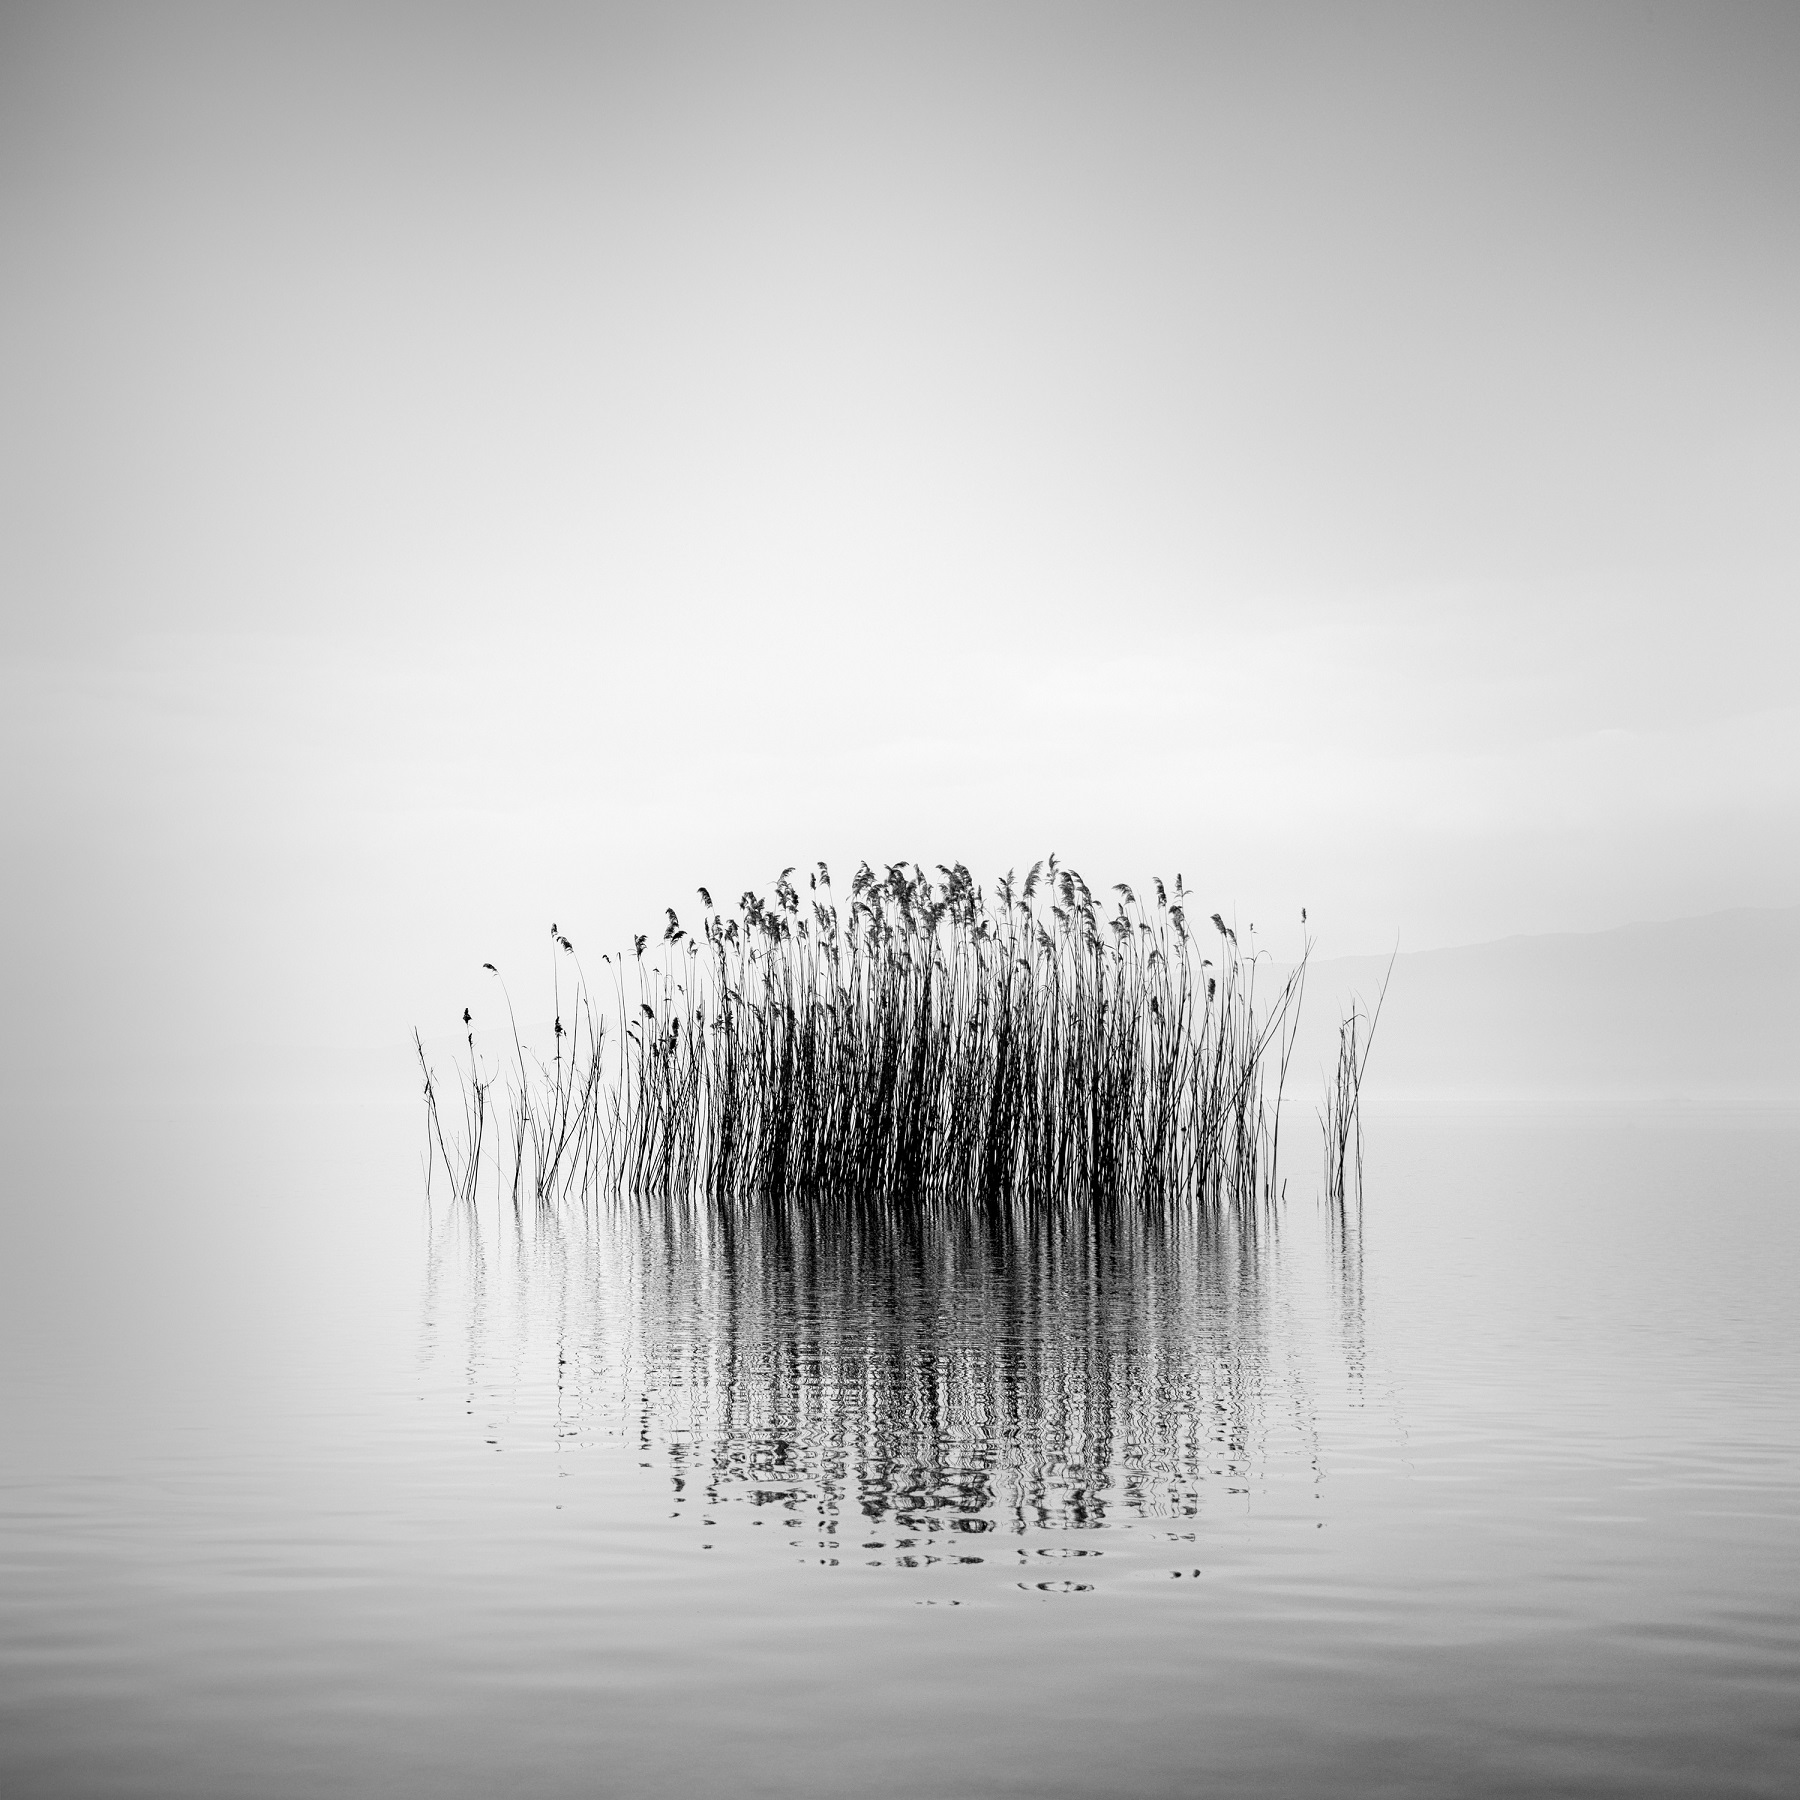 HAIDA SPECIAL AWARD WINNER George Digalakis - Echoing Spaces - International Black and White Photo Awards 2022